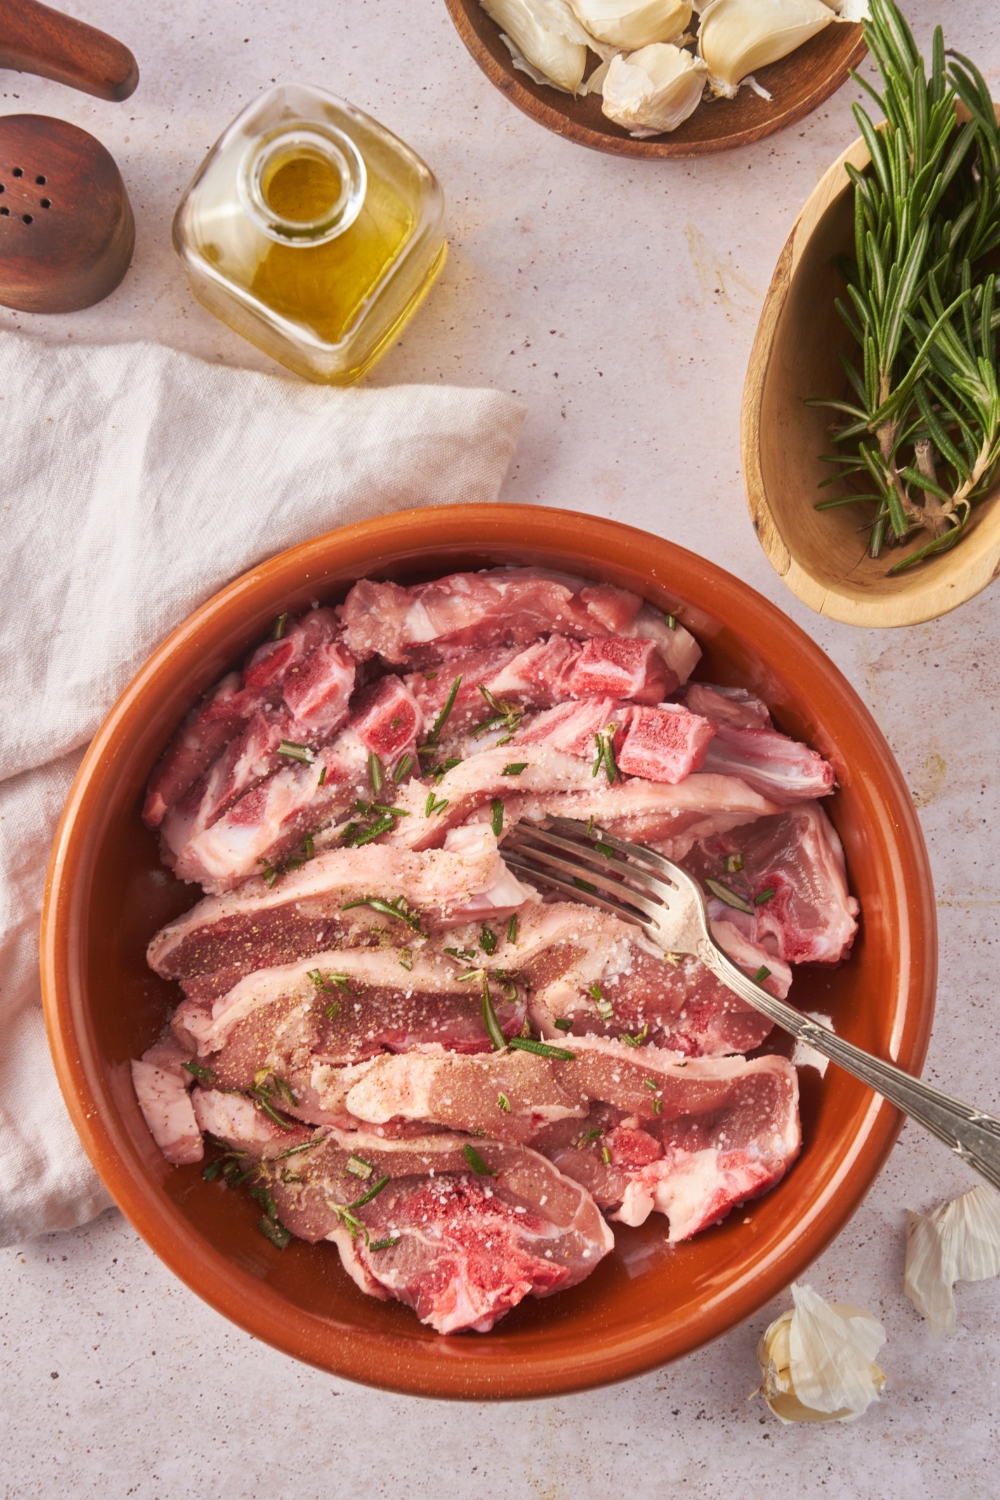 A red bowl filled with raw, seasoned lamb chops surrounded by an assortment of ingredients including a bottle of oil, garlic, and rosemary.